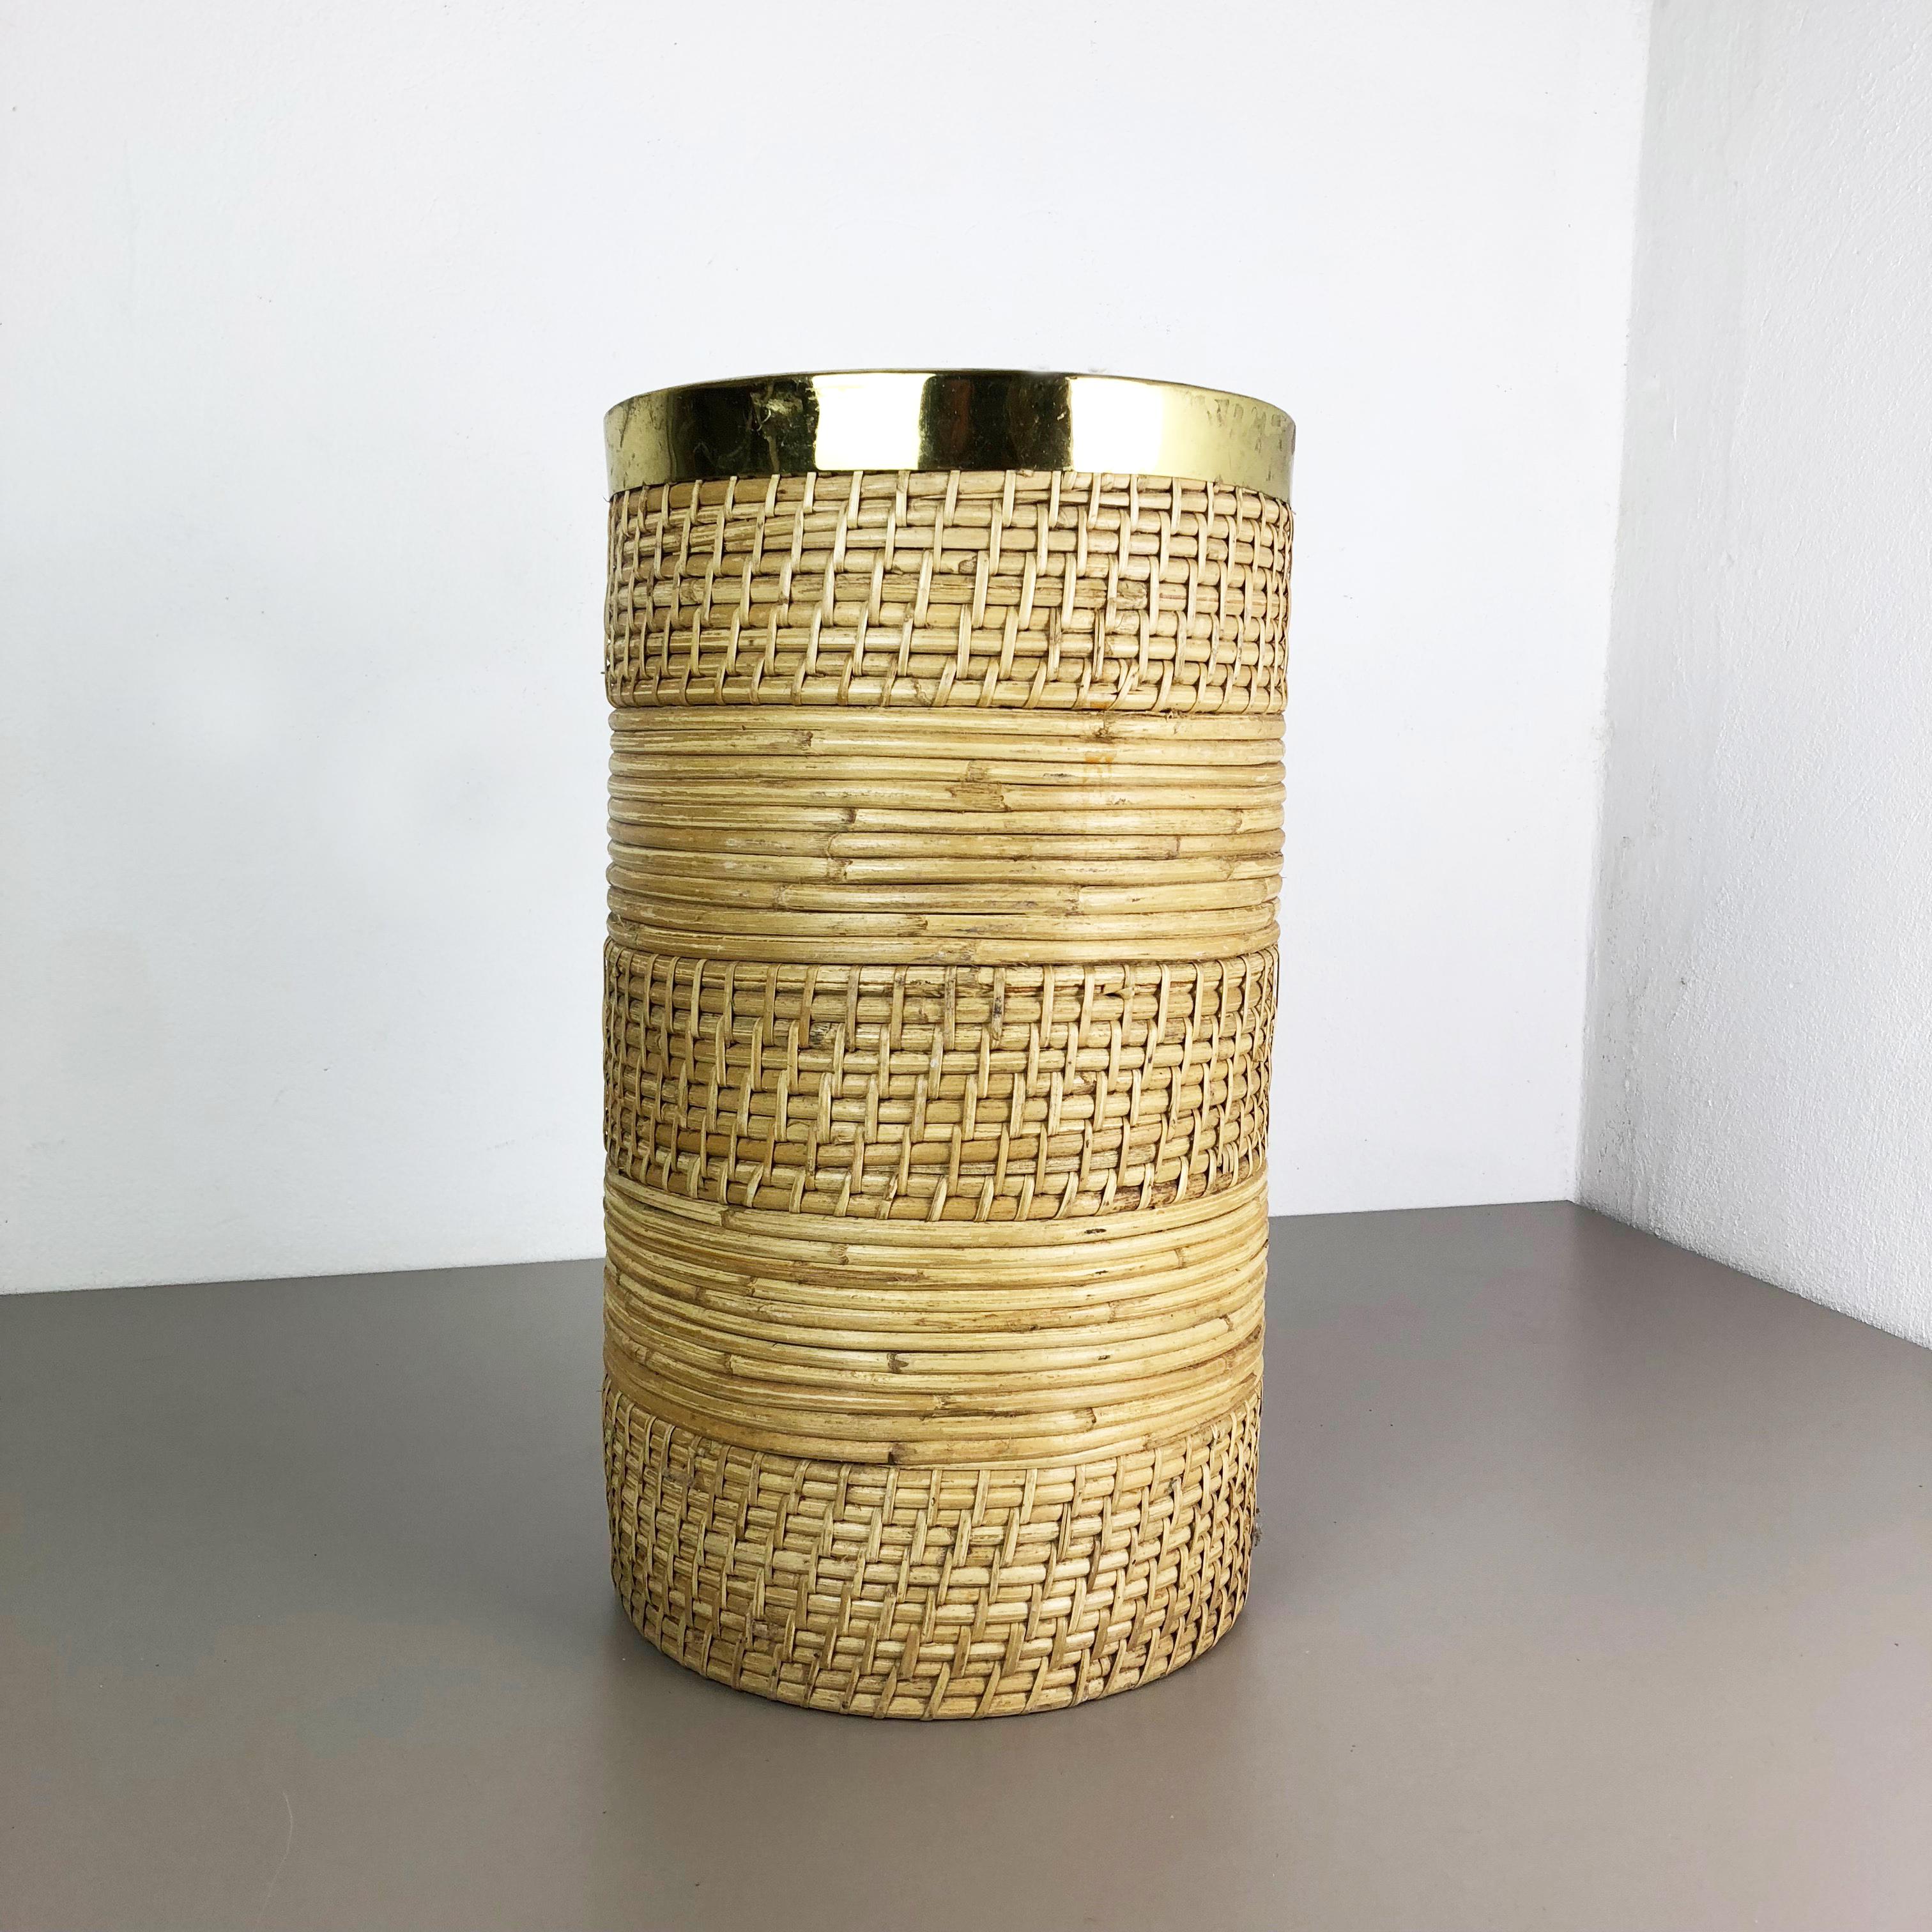 Article: Waste bin paper bin or umbrella stand

Origin: France

Age: 1960s

This original vintage Bauhaus style waste bin paper bin, umbrella stand was produced in the 1960s in France. It is made of natural rattan with a brass applications at the